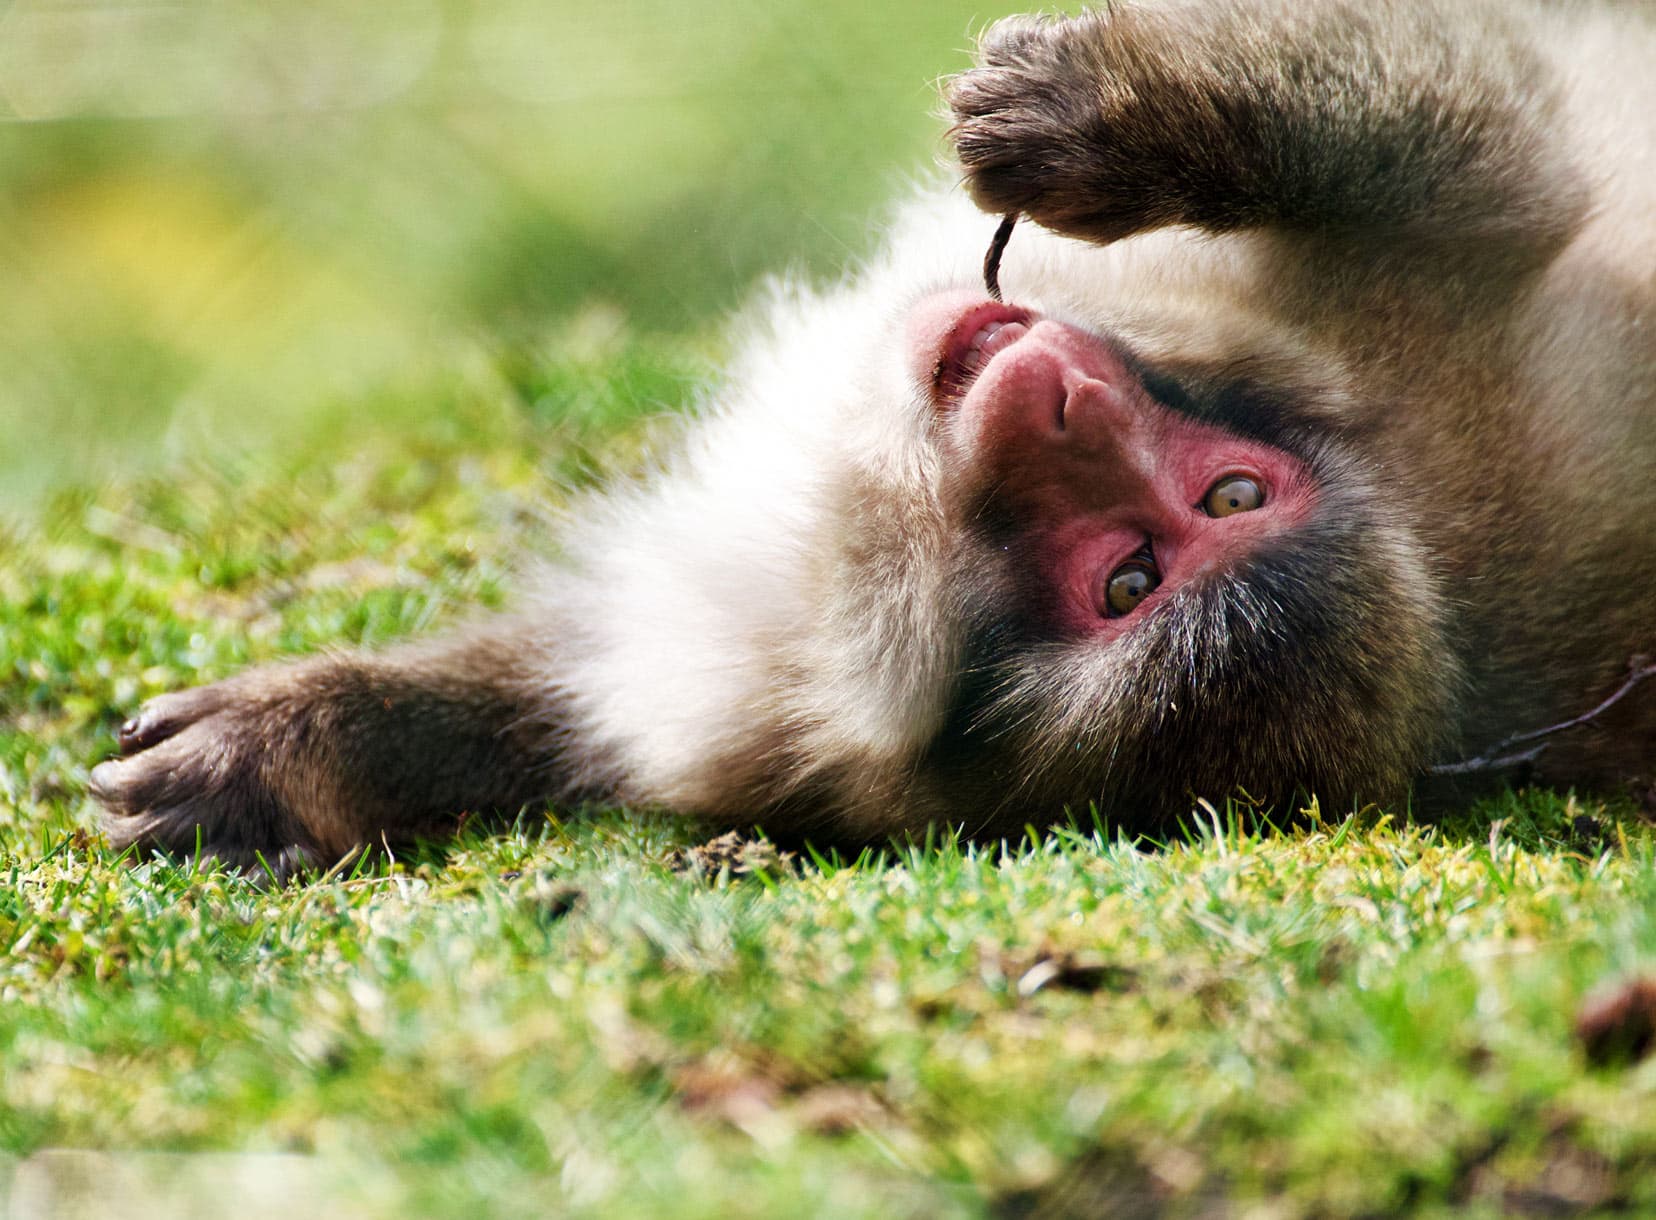 snow monkey lying on its back chewing a piece of grass